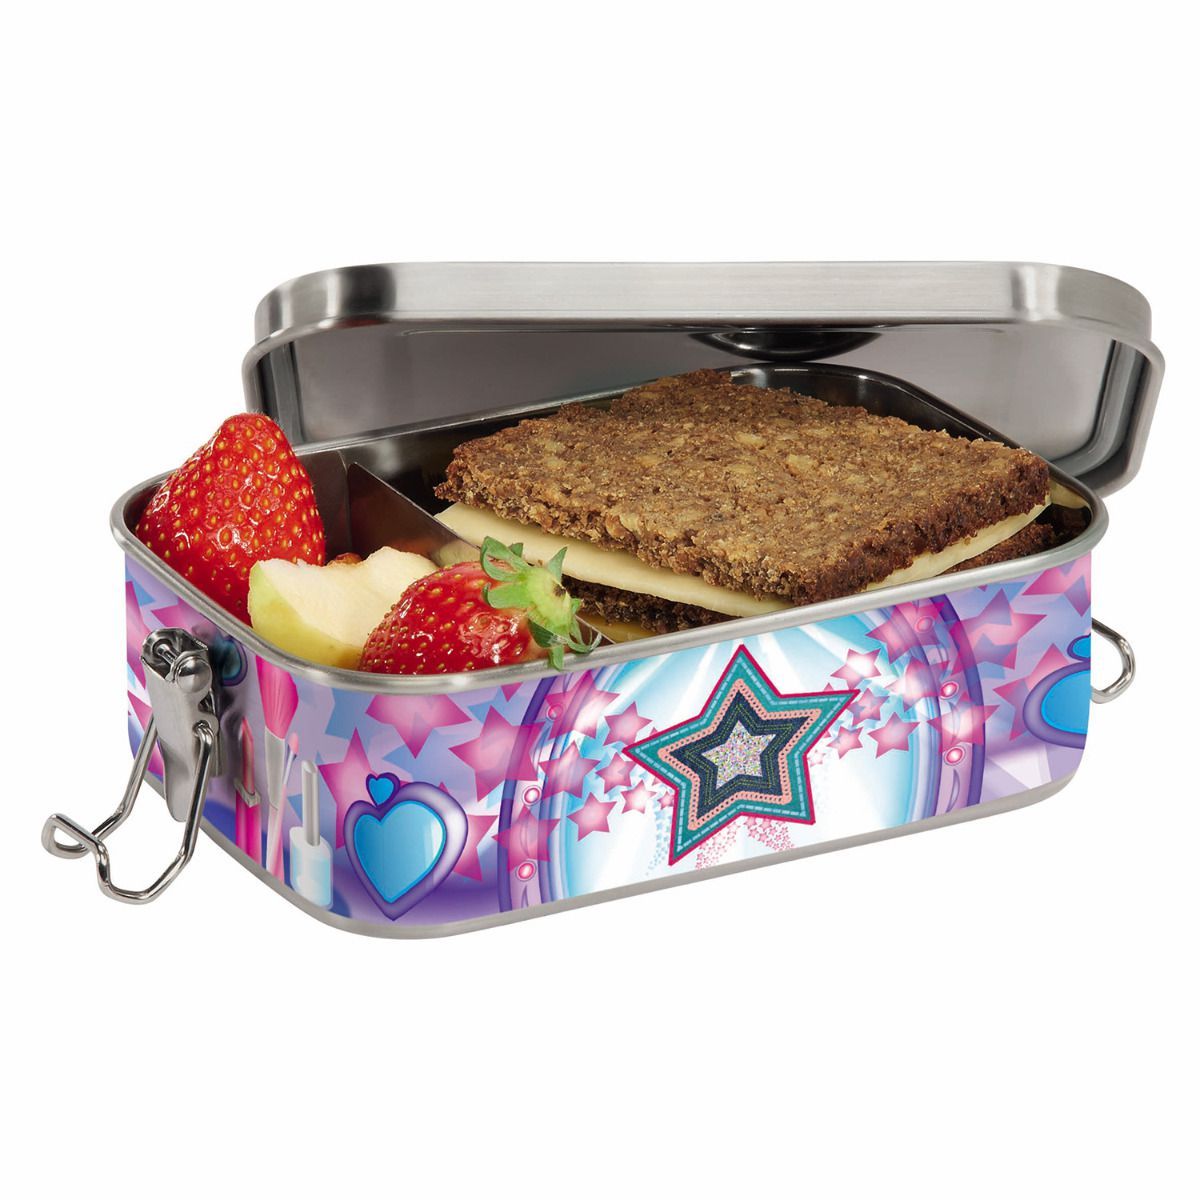 Step by Step Edelstahl Lunchbox Glamour Star Astra